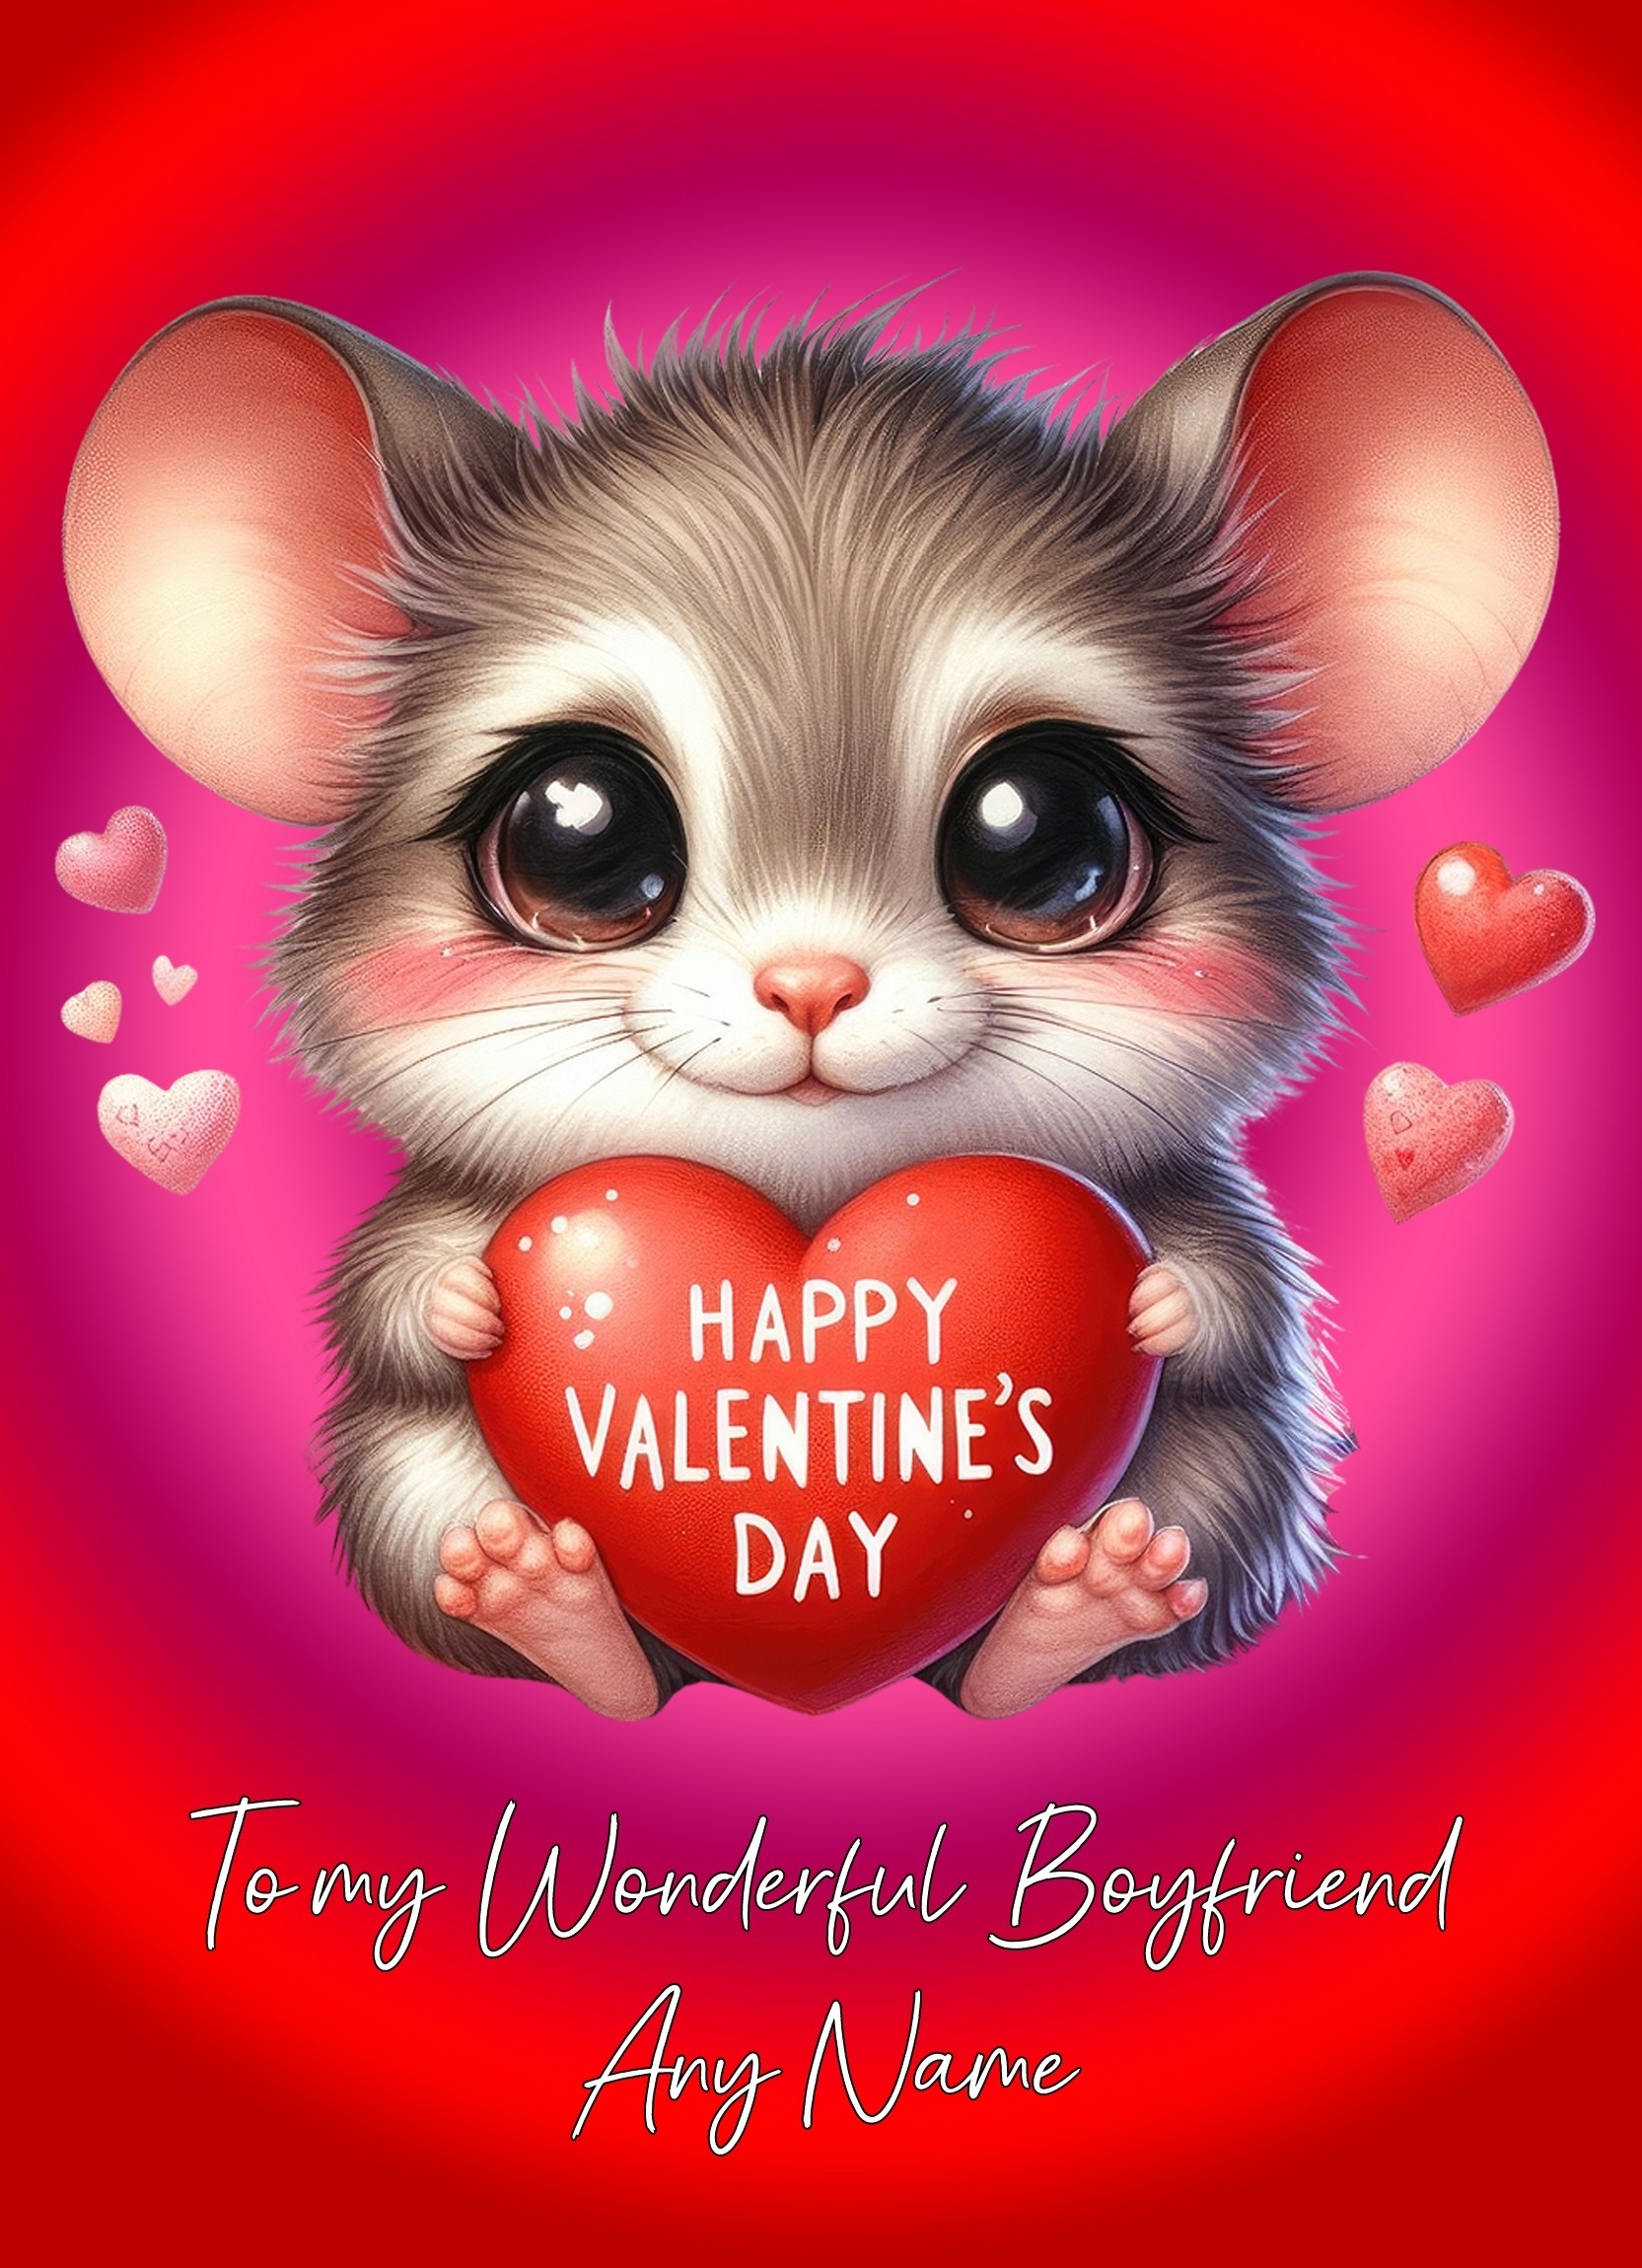 Personalised Valentines Day Card for Boyfriend (Mouse)